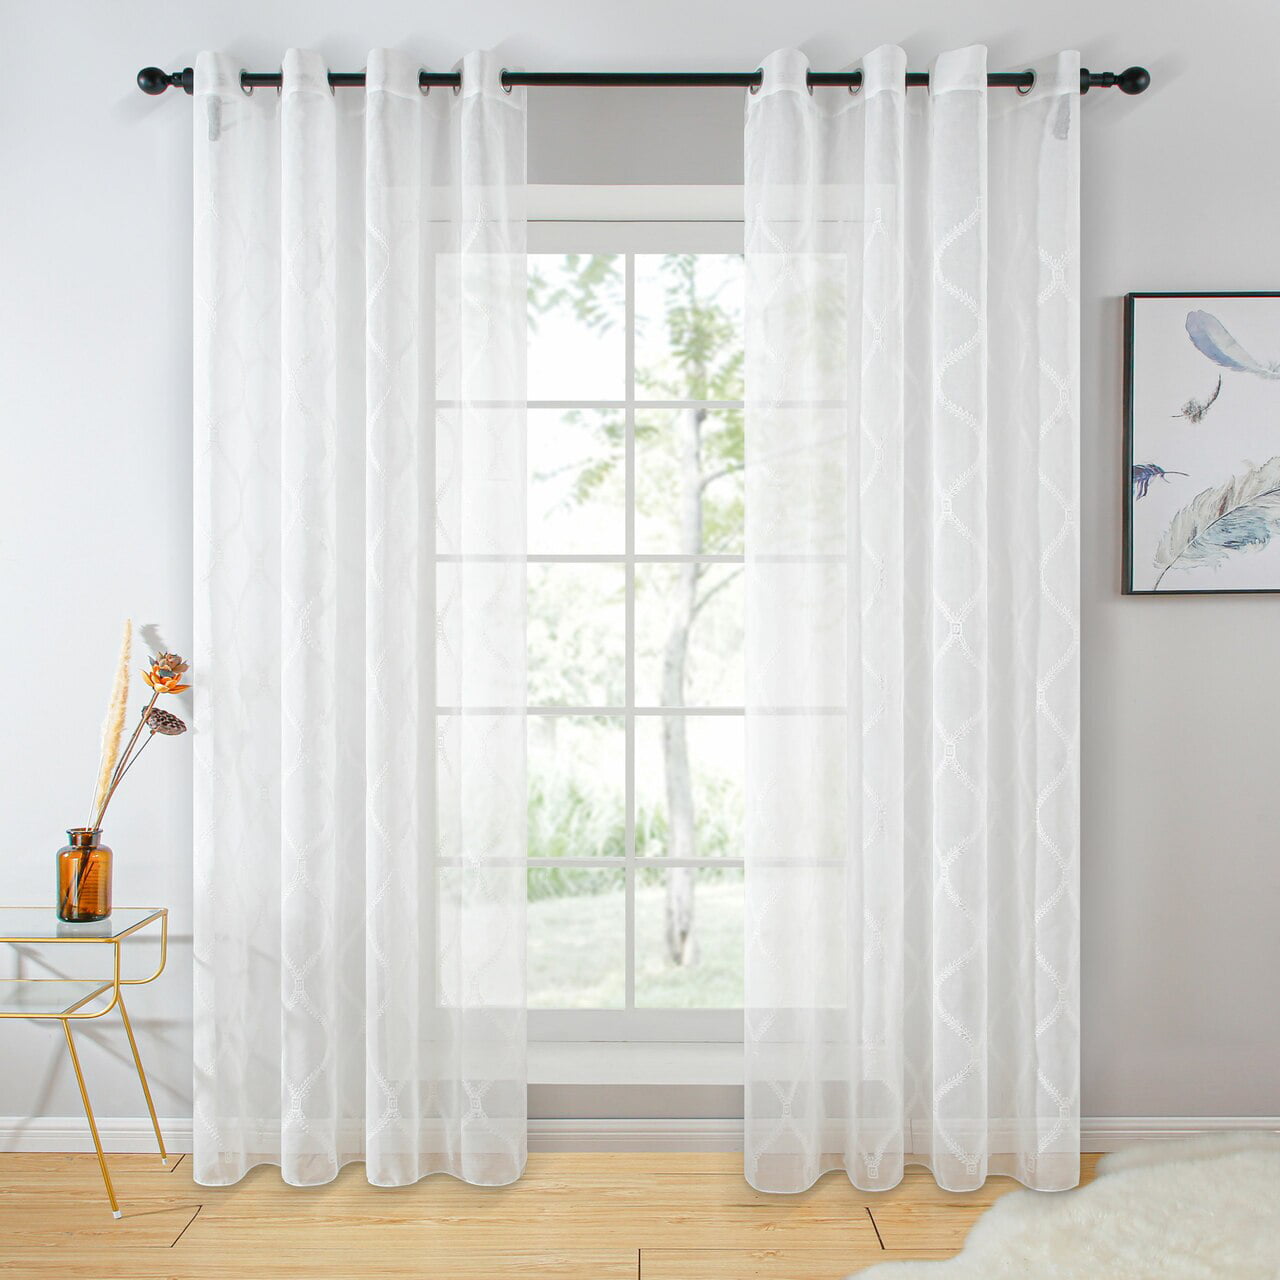 Picture of Dolce Mela DMC732 Toulouse - Sheer Curtain Panel, White - Tall